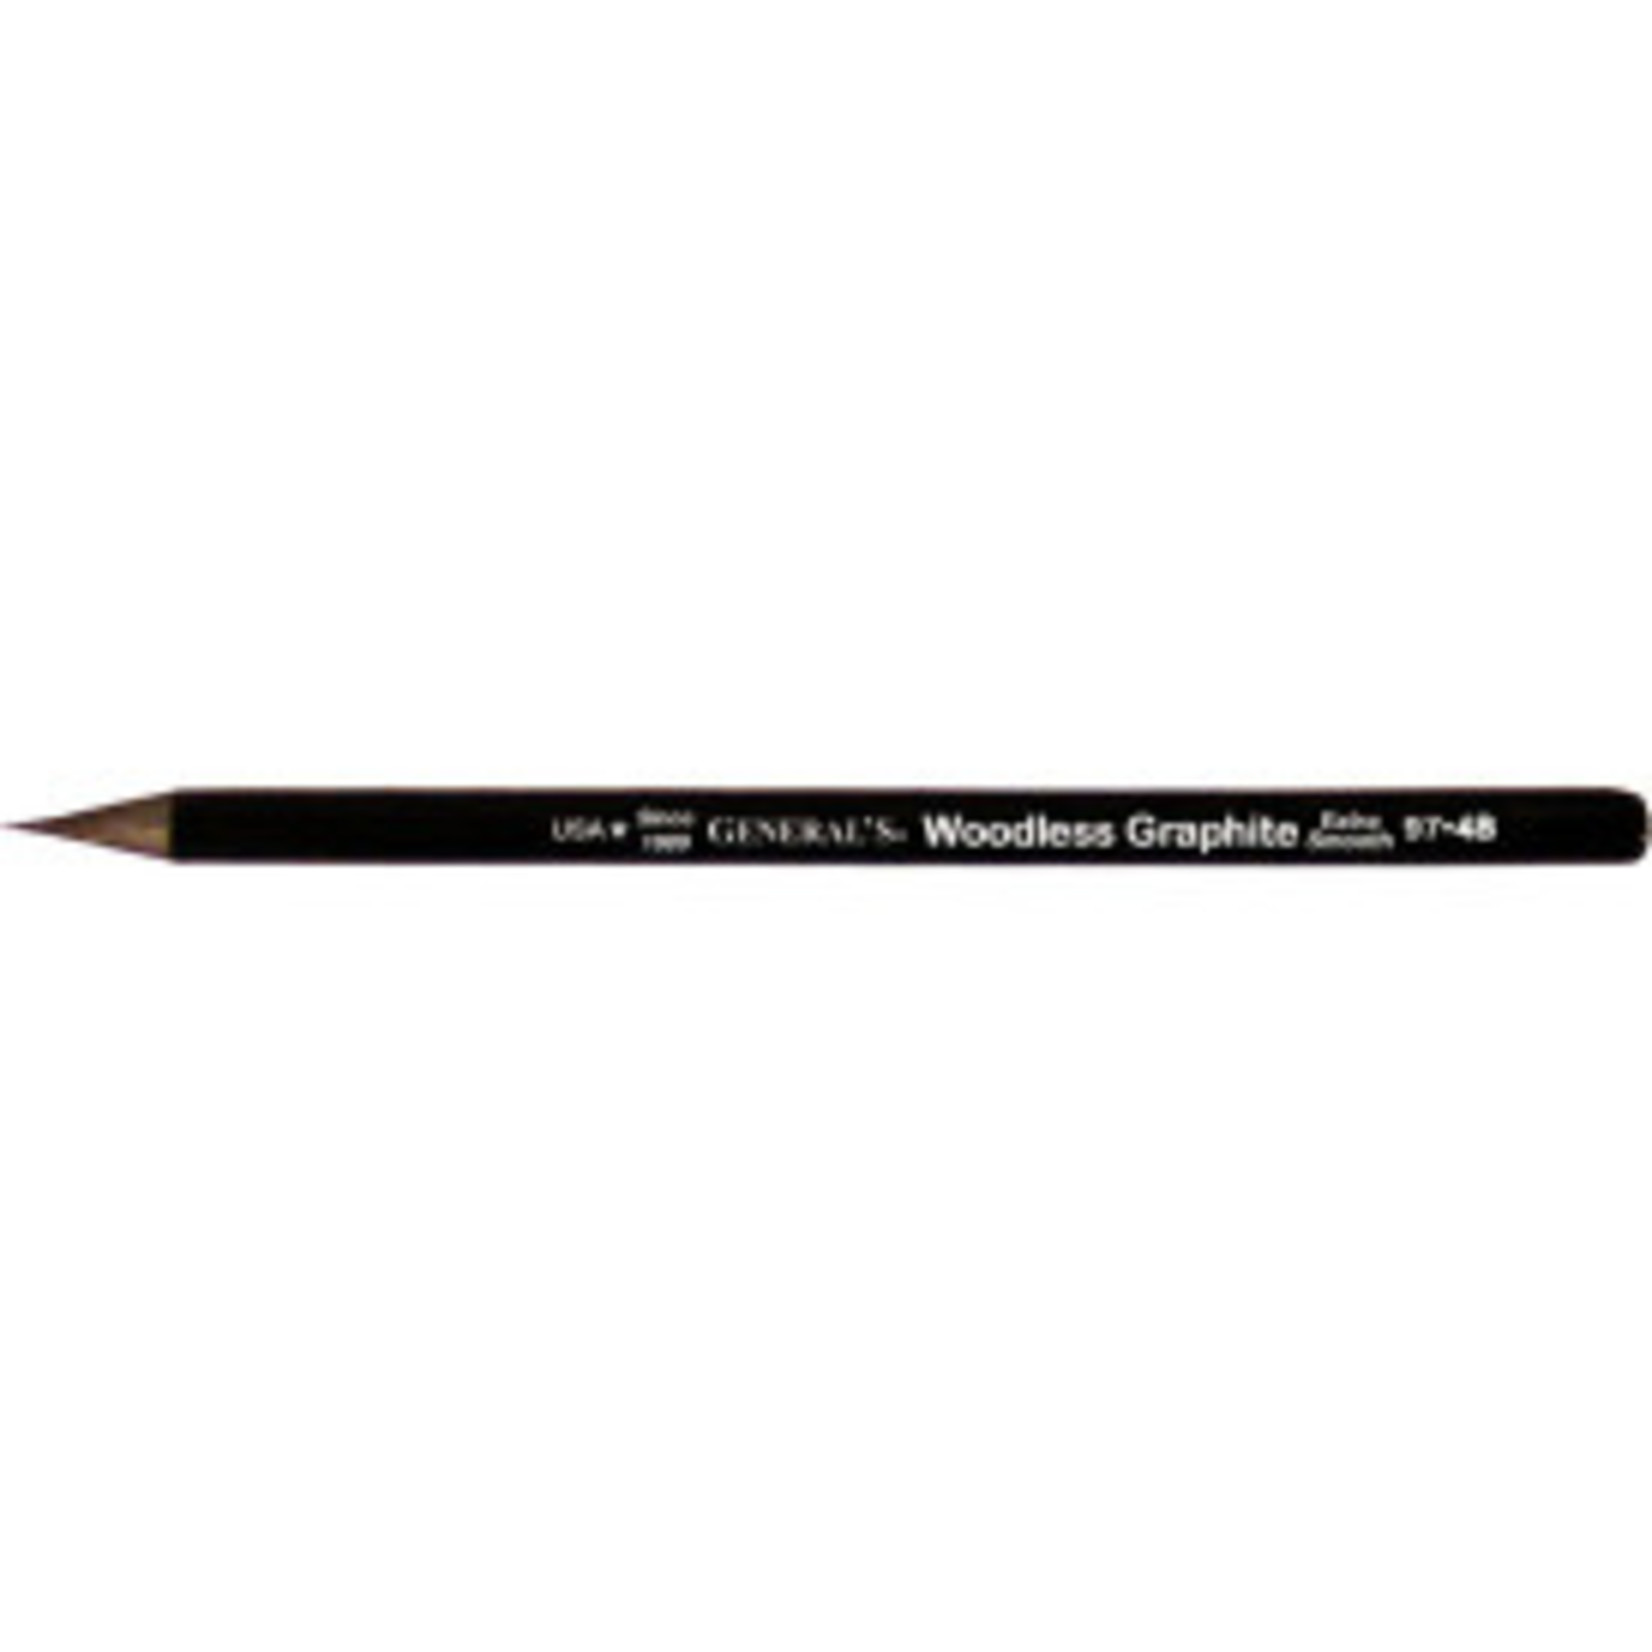 GENERAL'S WOODLESS GRAPHITE 4B (TBD)